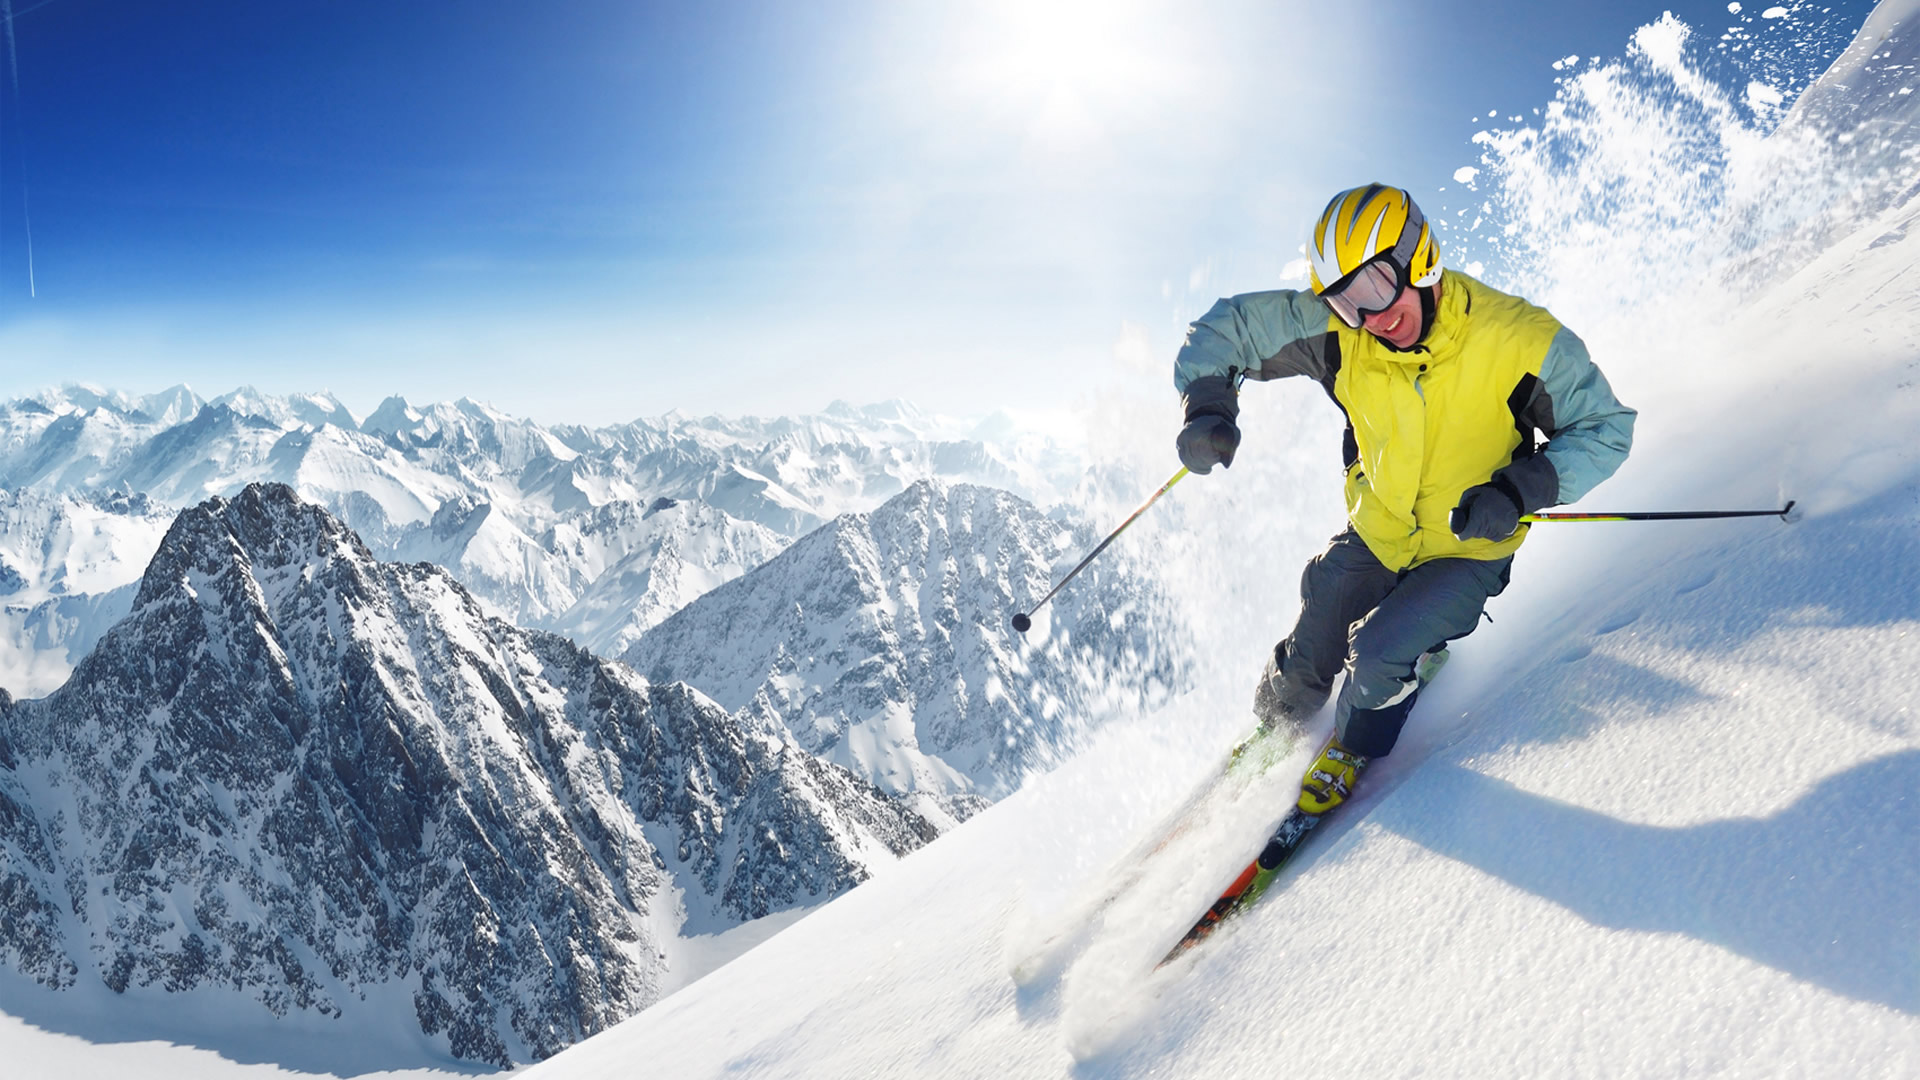 Skiing Sport Wallpaper Background Cool